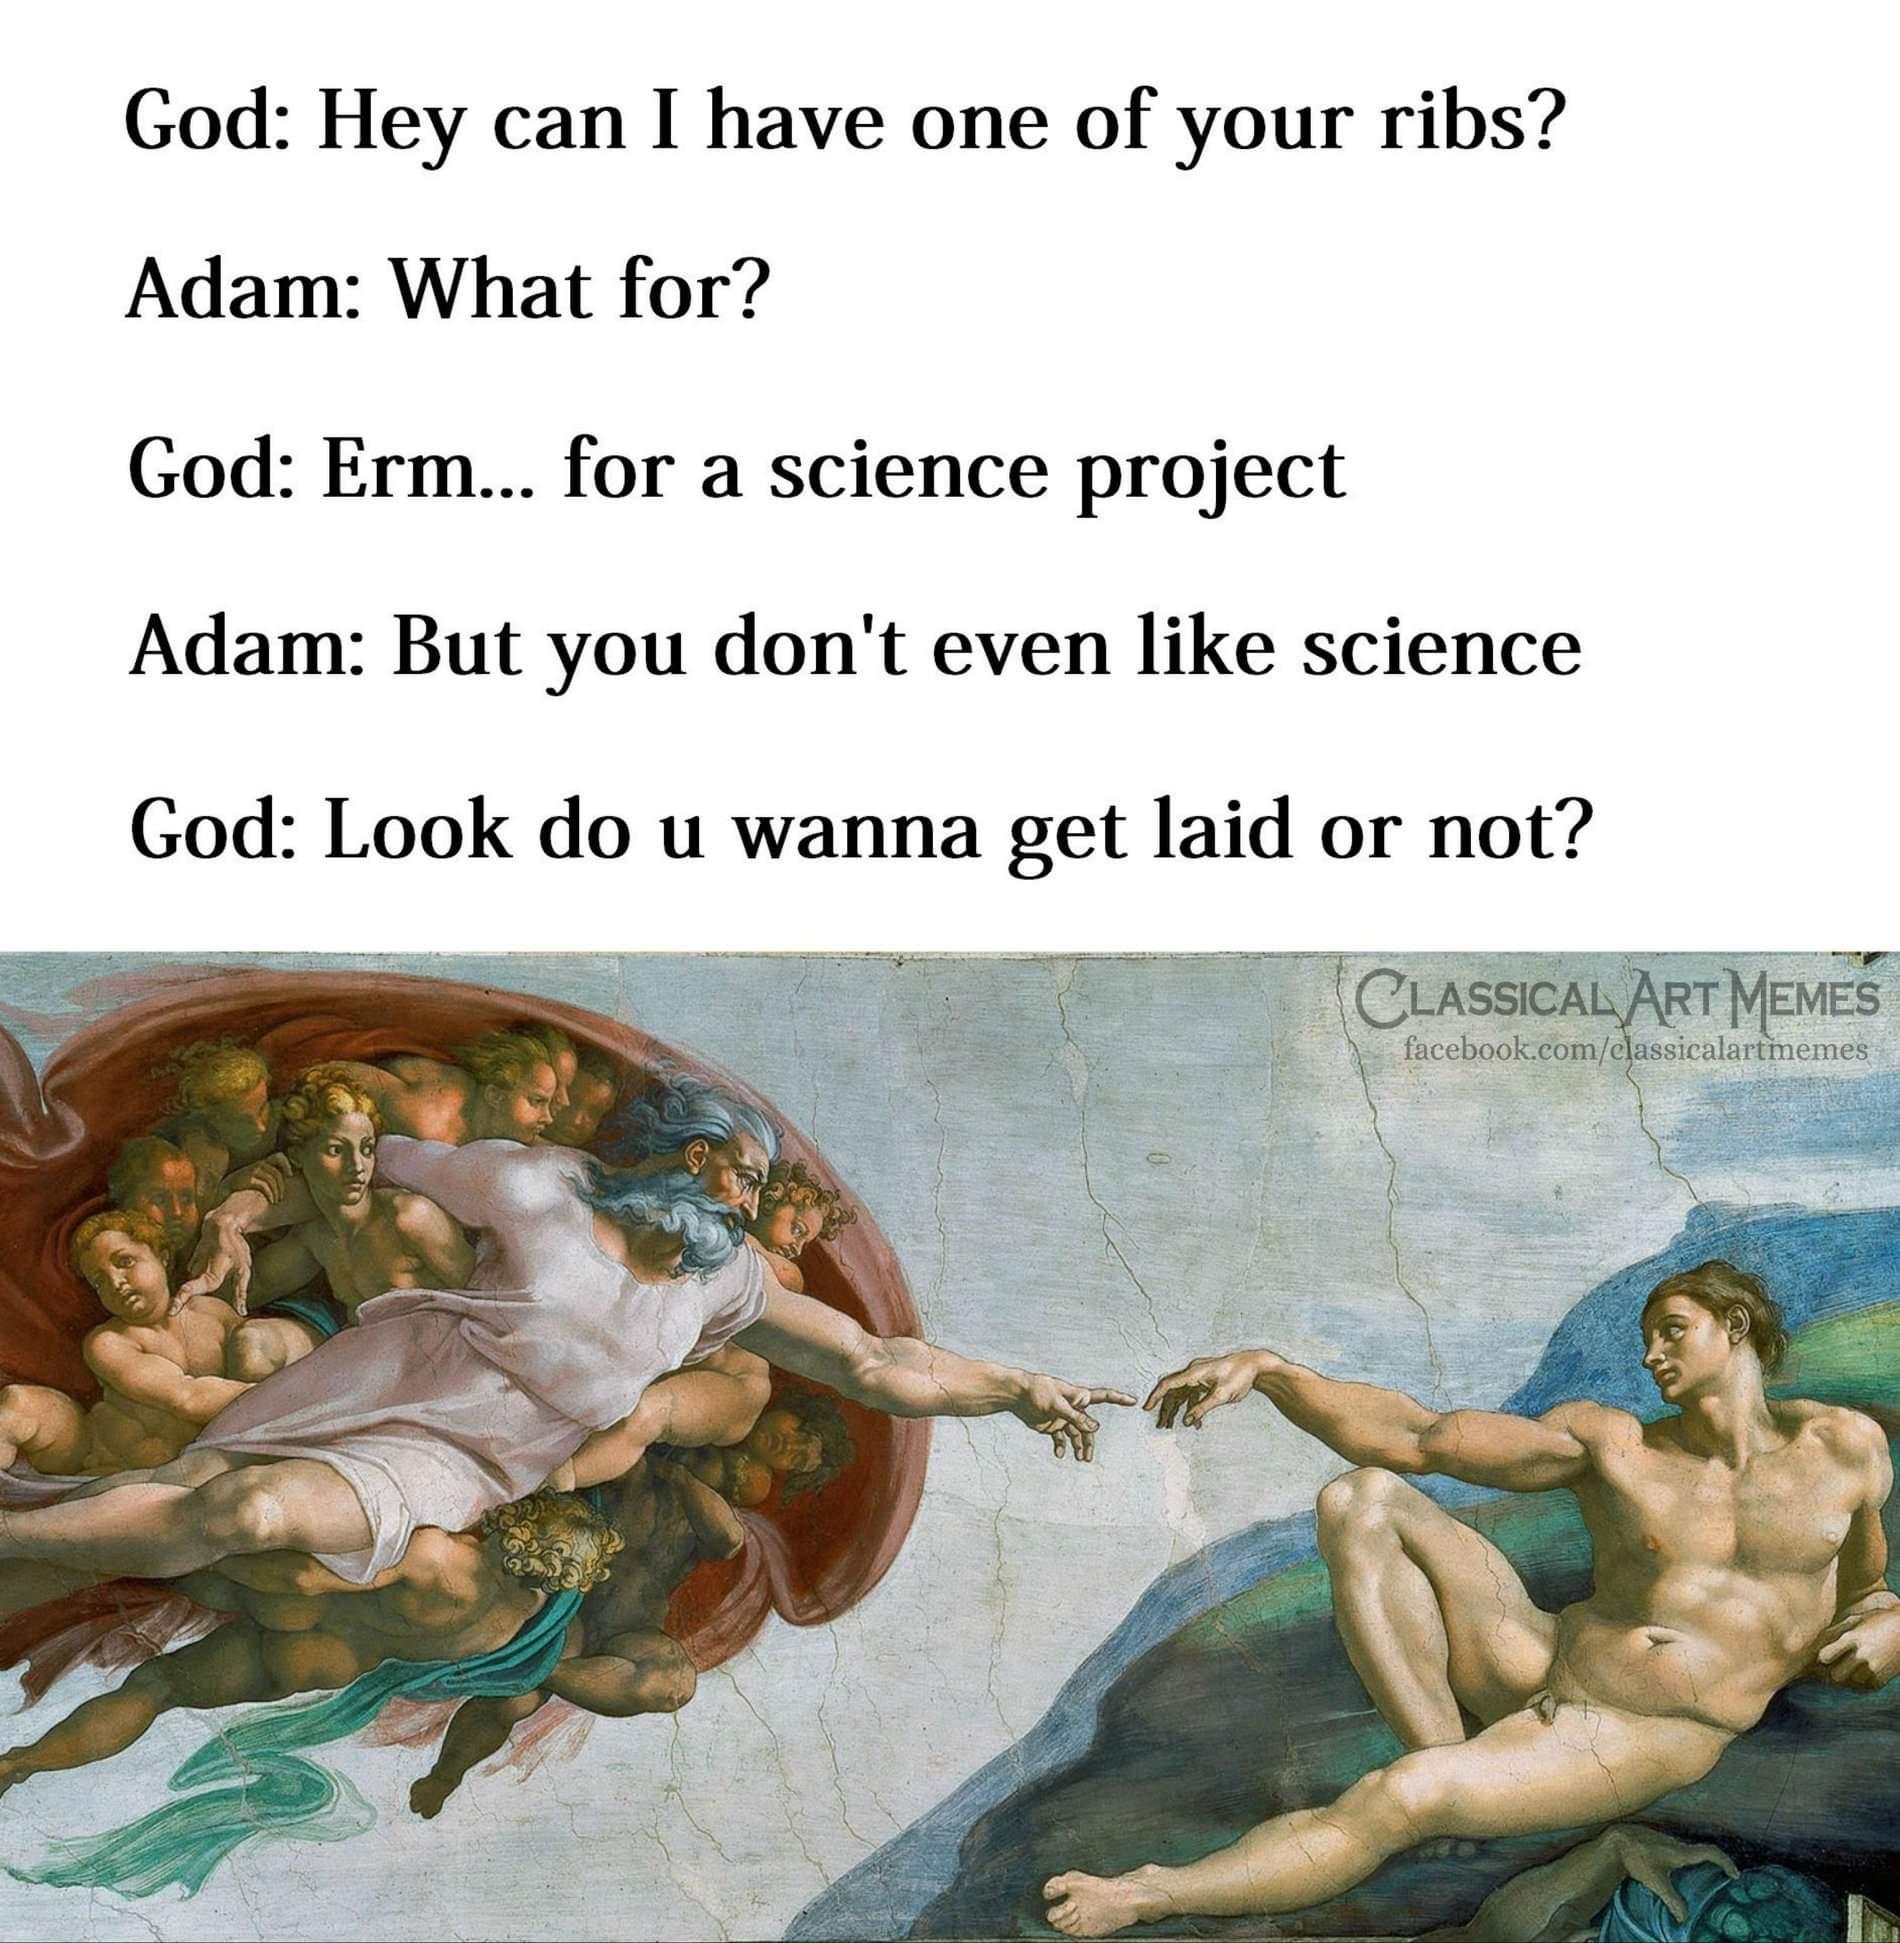 classical art memes science - God Hey can I have one of your ribs? Adam What for? God Erm... for a science project Adam But you don't even science God Look do u wanna get laid or not? Classical Art Memes facebook.comclassicalartmemes